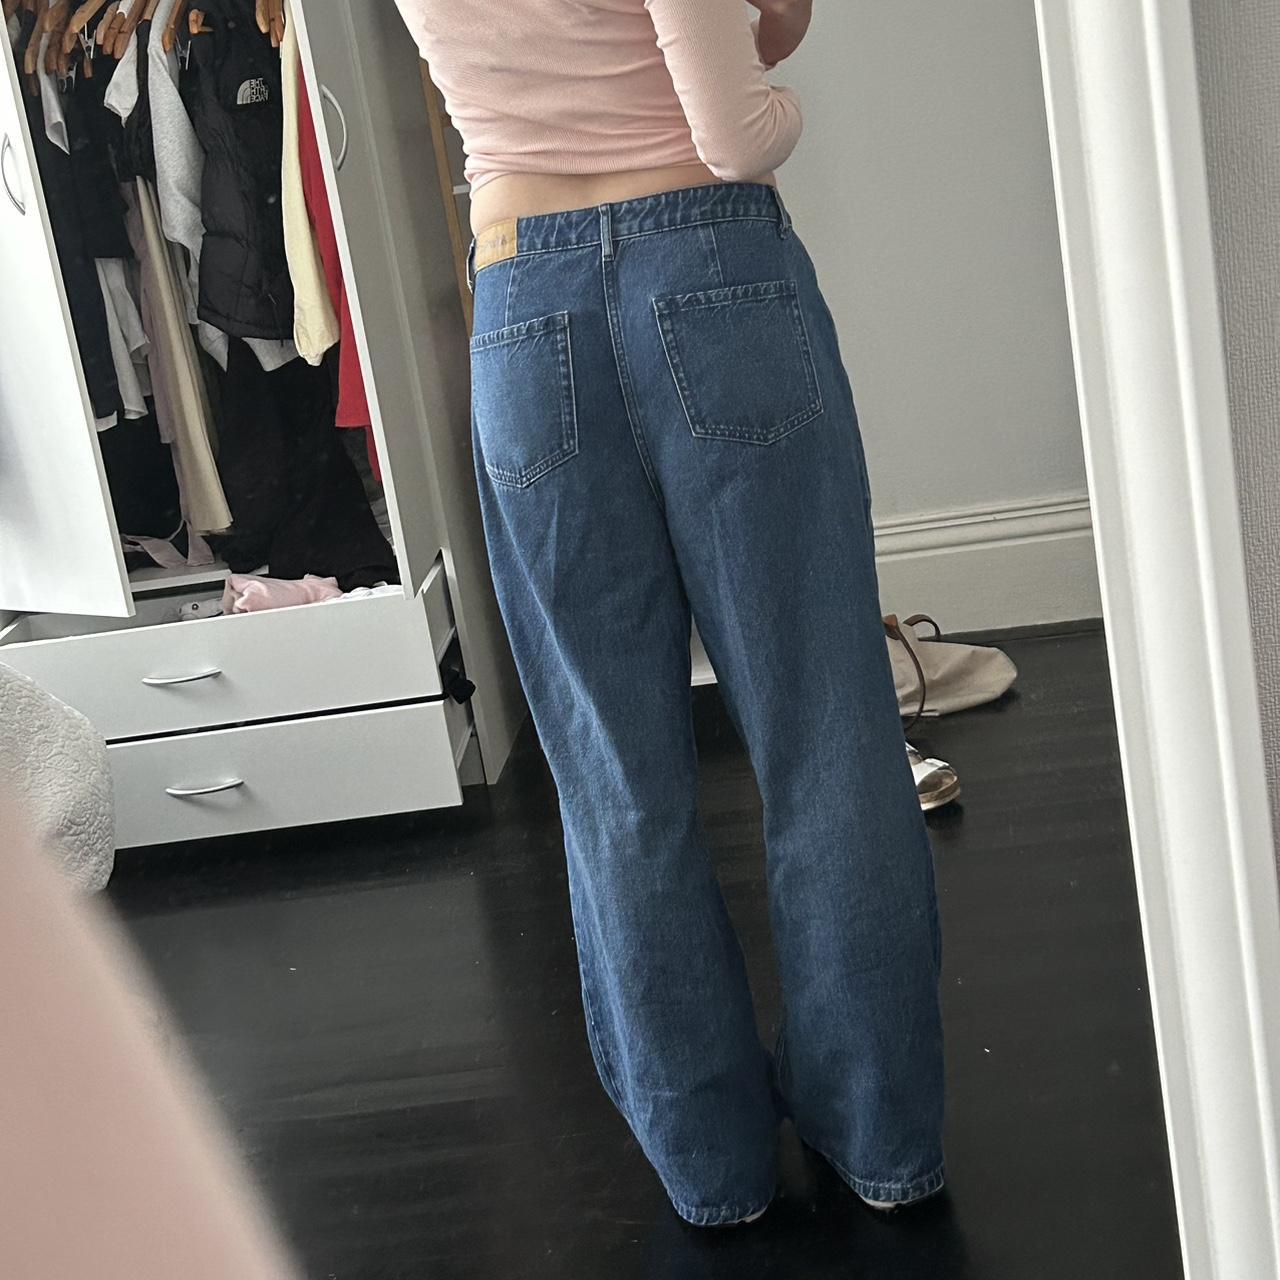 More photos for @laura555 of the afends jeans ️ - Depop